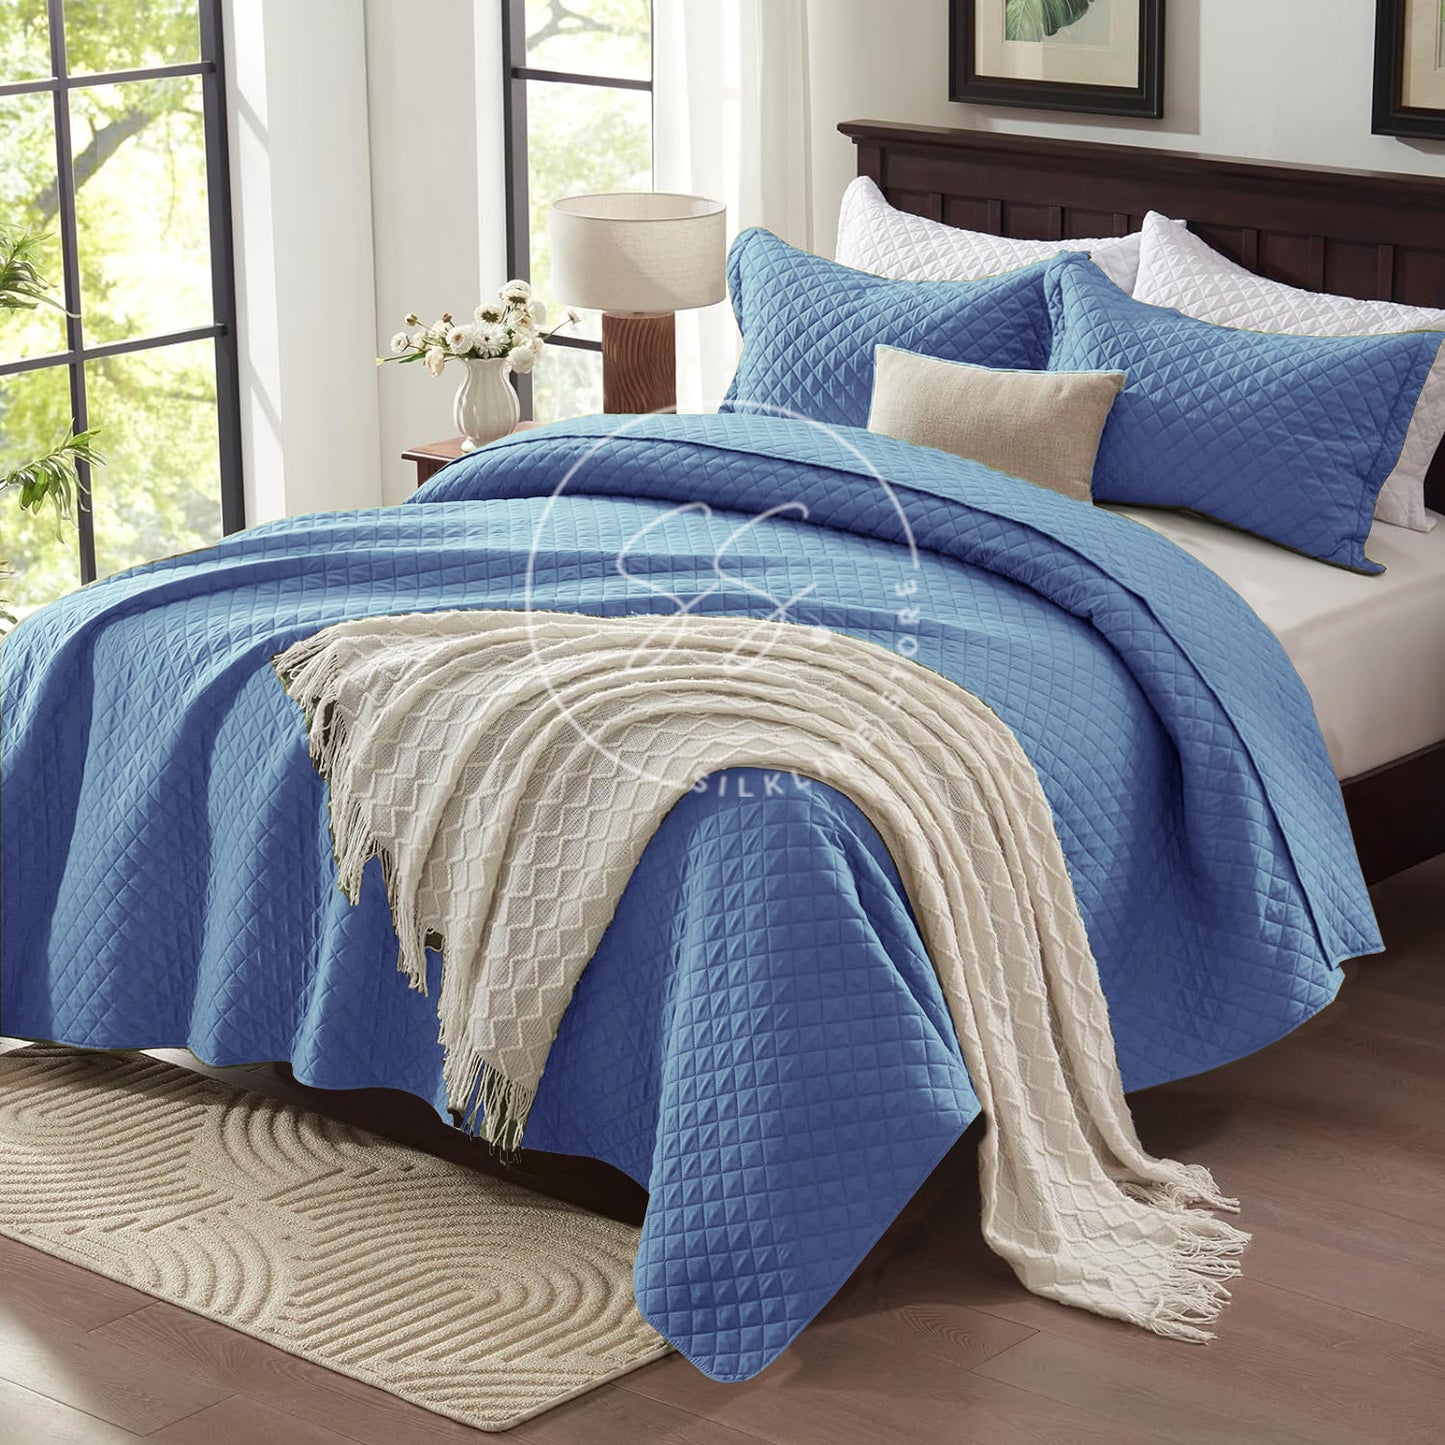 Sky blue - king Size Microfibre: Quilted 3 pcs bedspread set